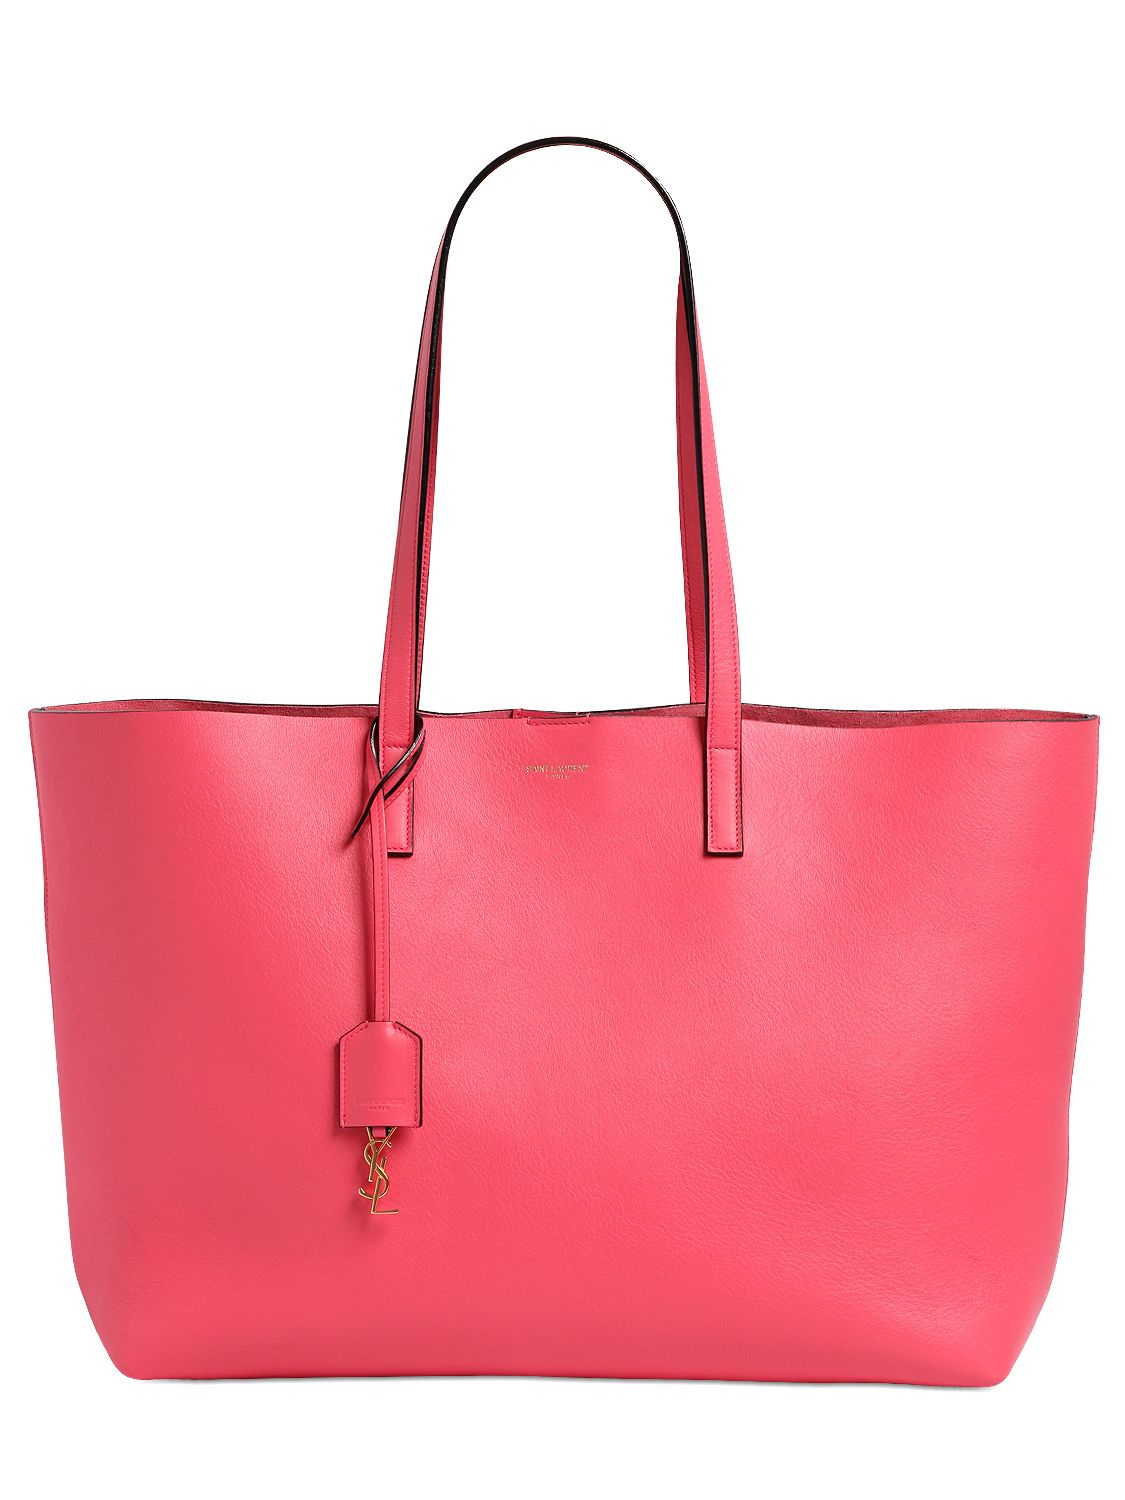 Saint laurent Soft Leather Tote Bag in Pink | Lyst